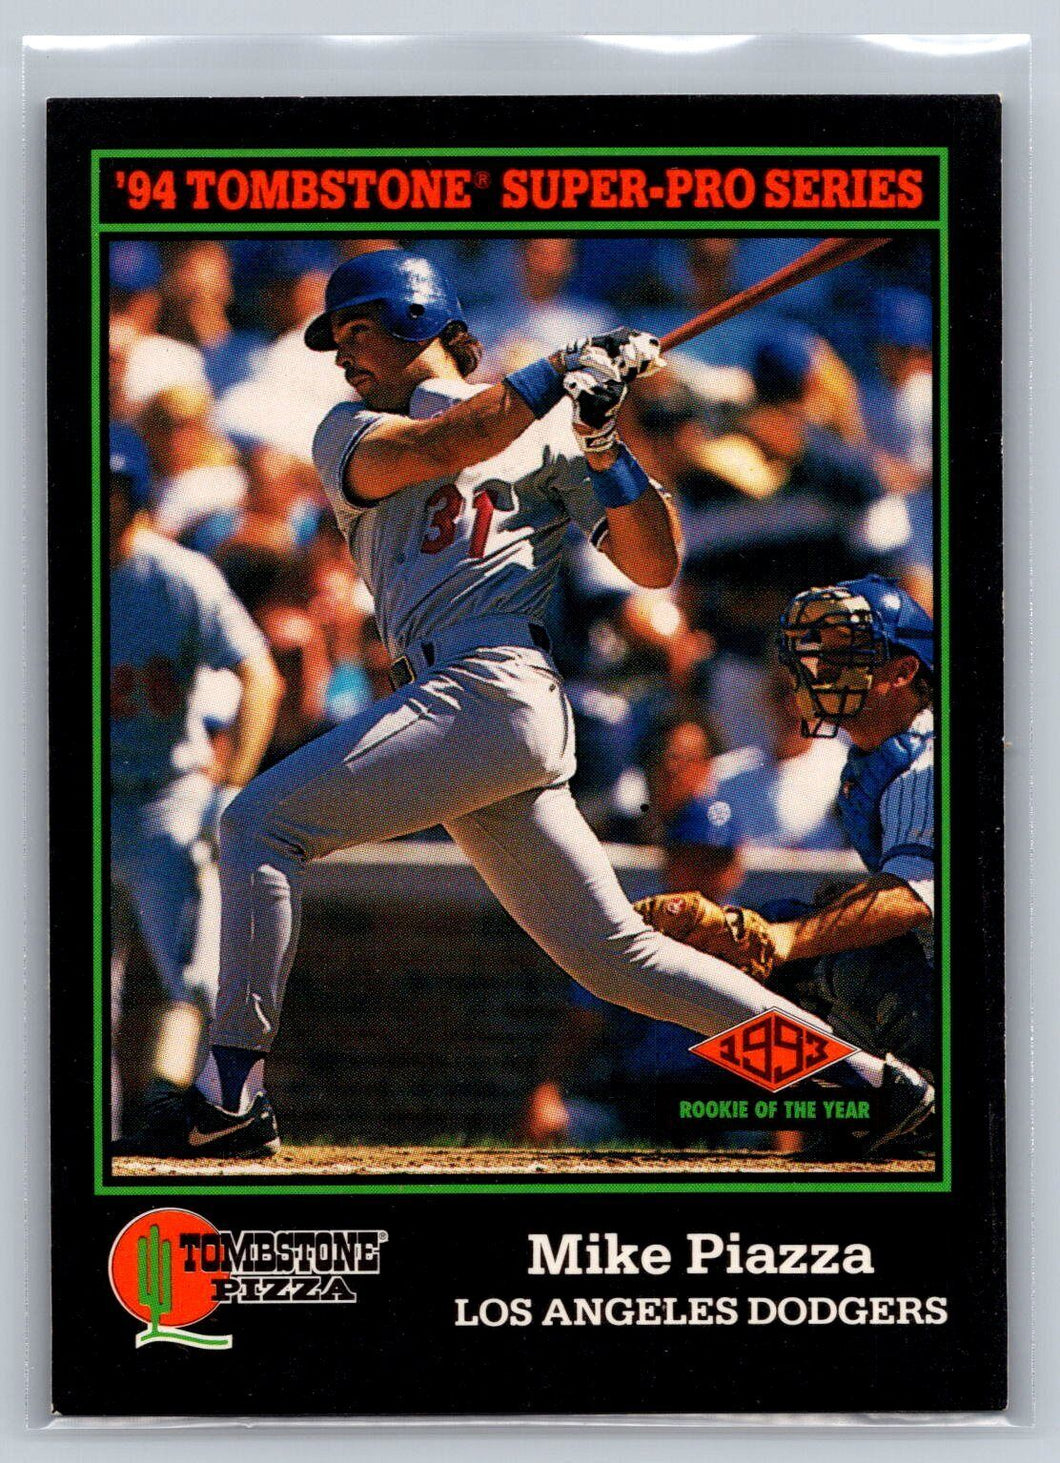 1994 Score Tombstone Super-Pro Series Mike Piazza 15/30 Los Angeles Dodgers